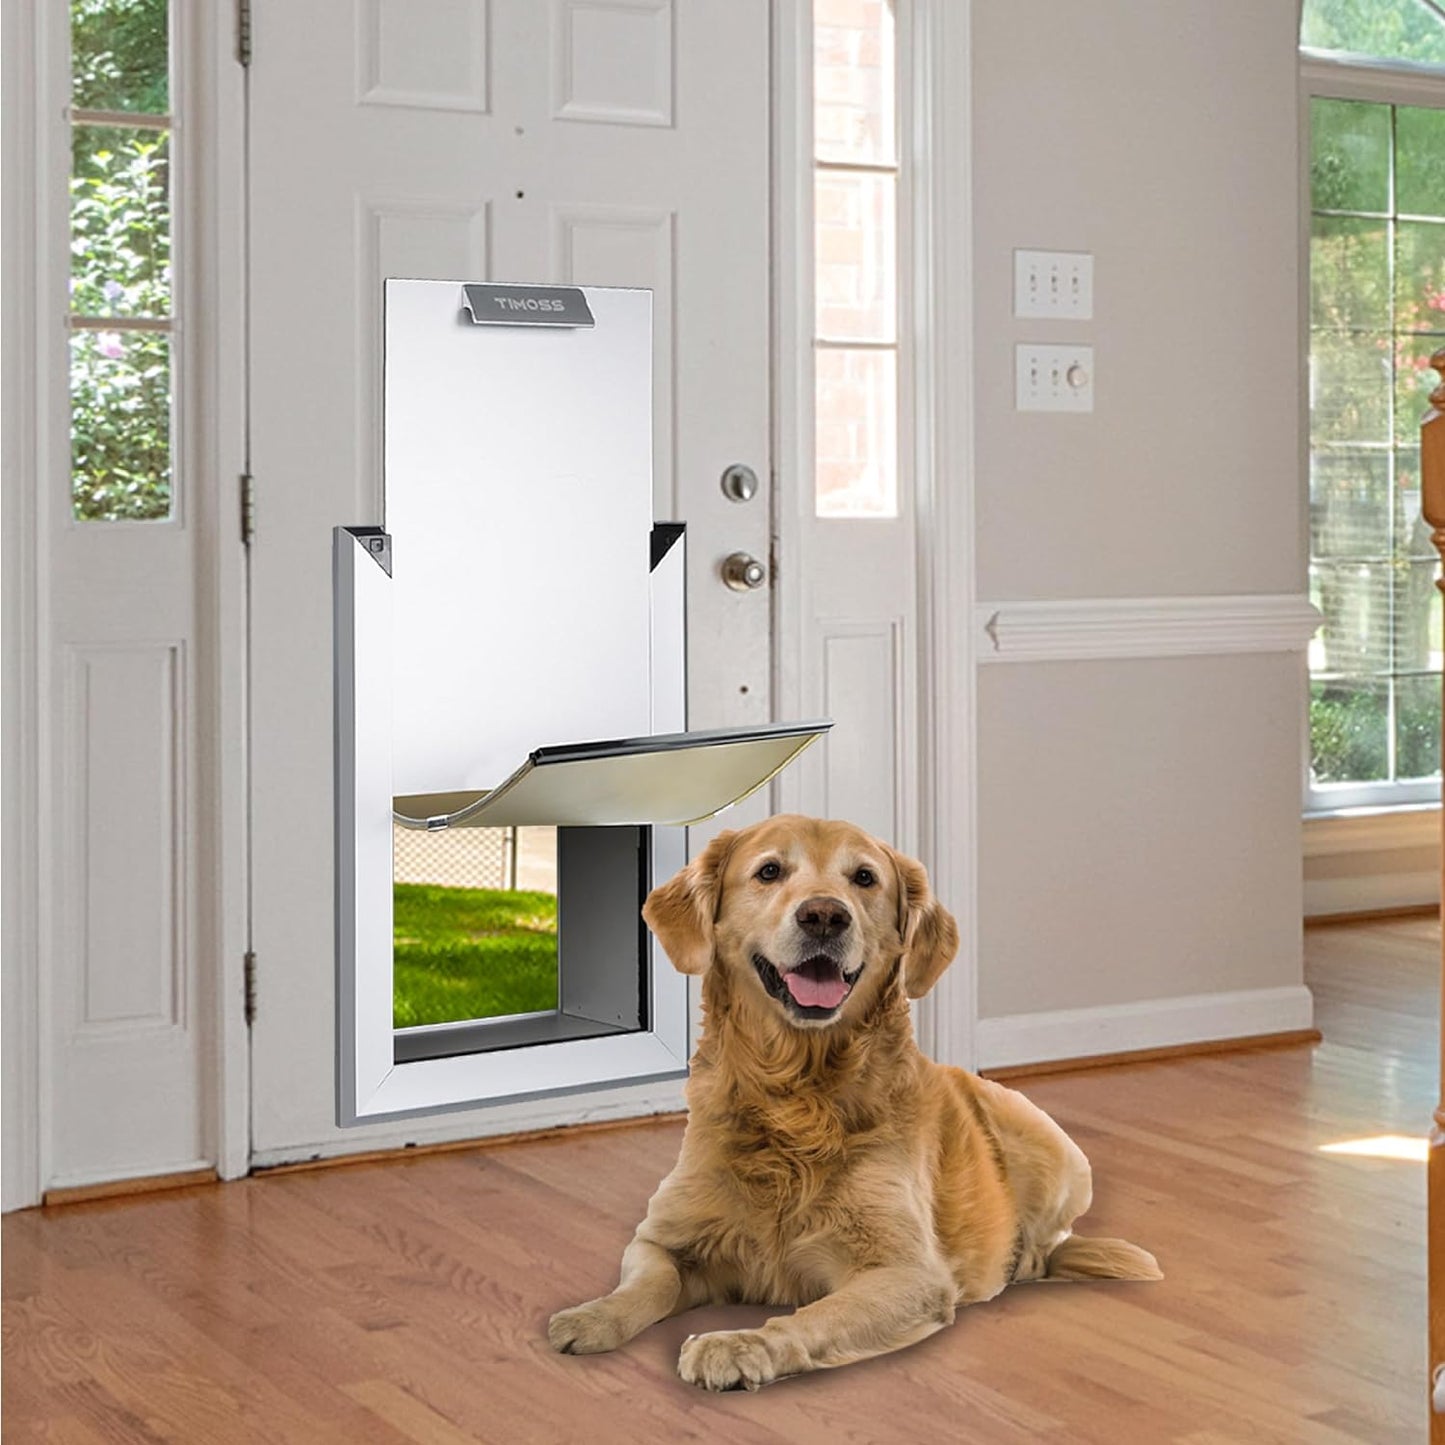 TIMOSS Aluminum Dog Door for Wall,Security Dog Door with Telescoping Tunnel and Sliding Locking Panel,Double Magnetic Flap, Portable Handle (X-Large (X-Large)